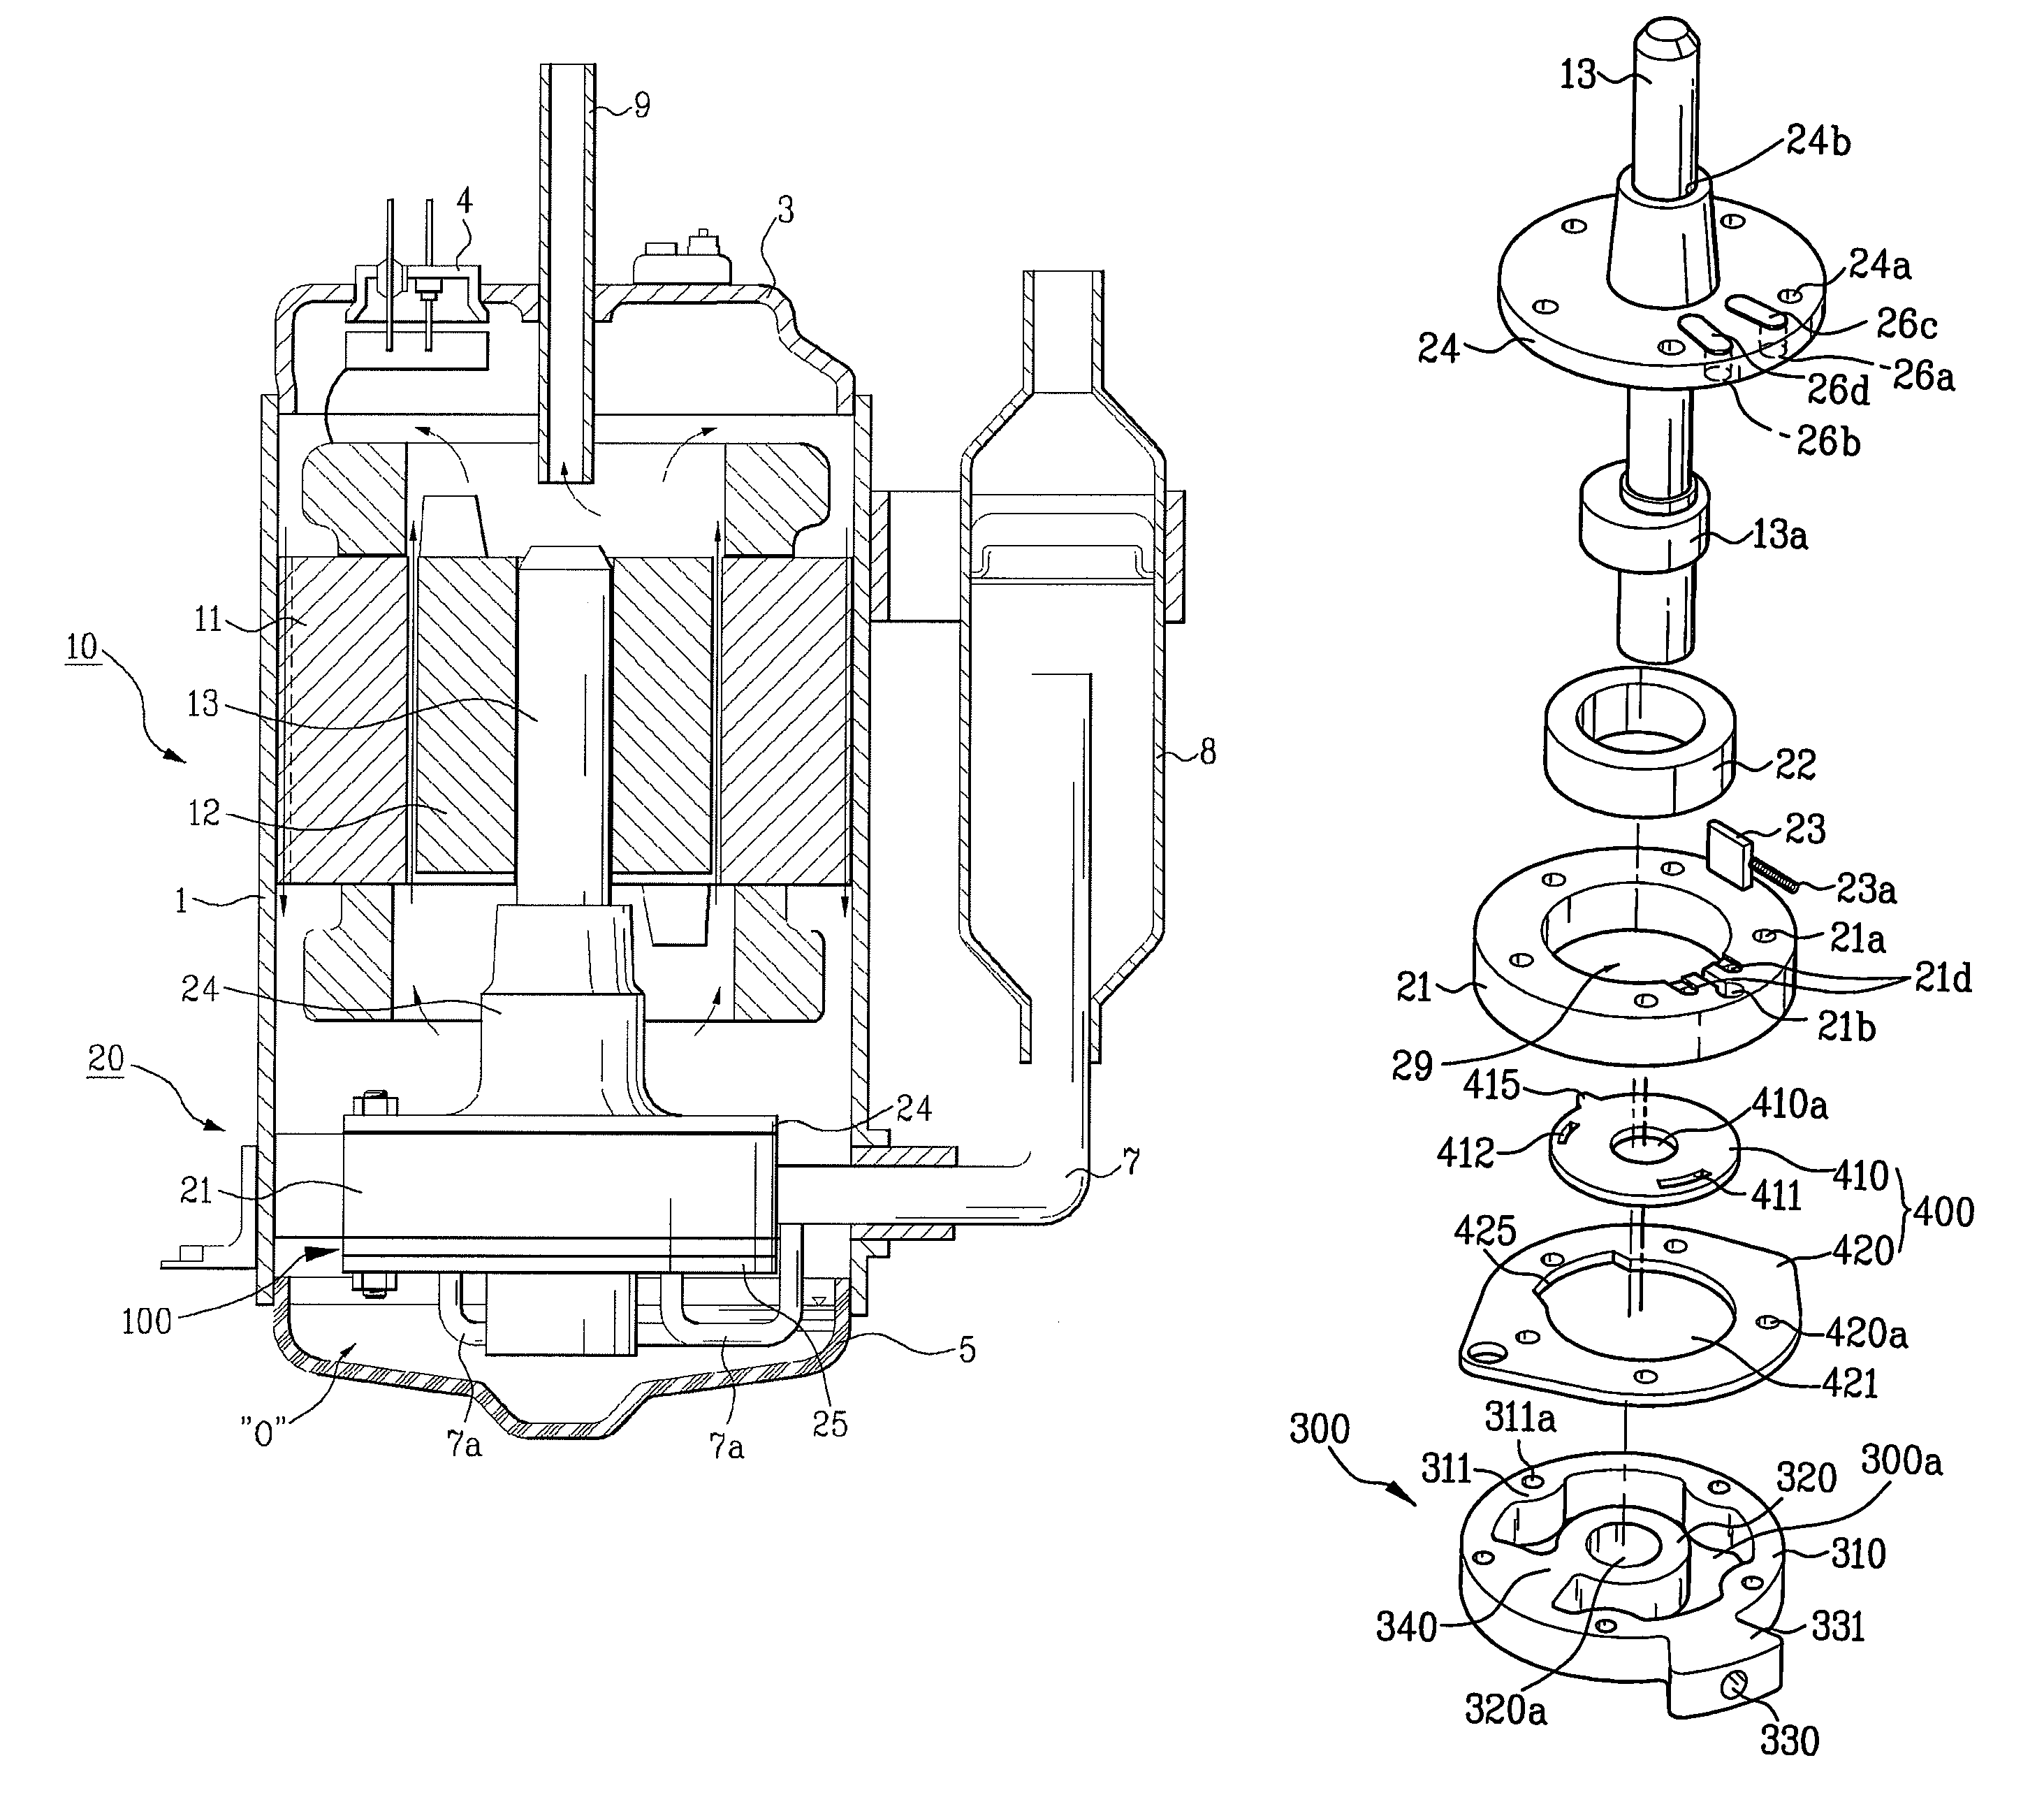 Rotary compressor for changing compression capacity